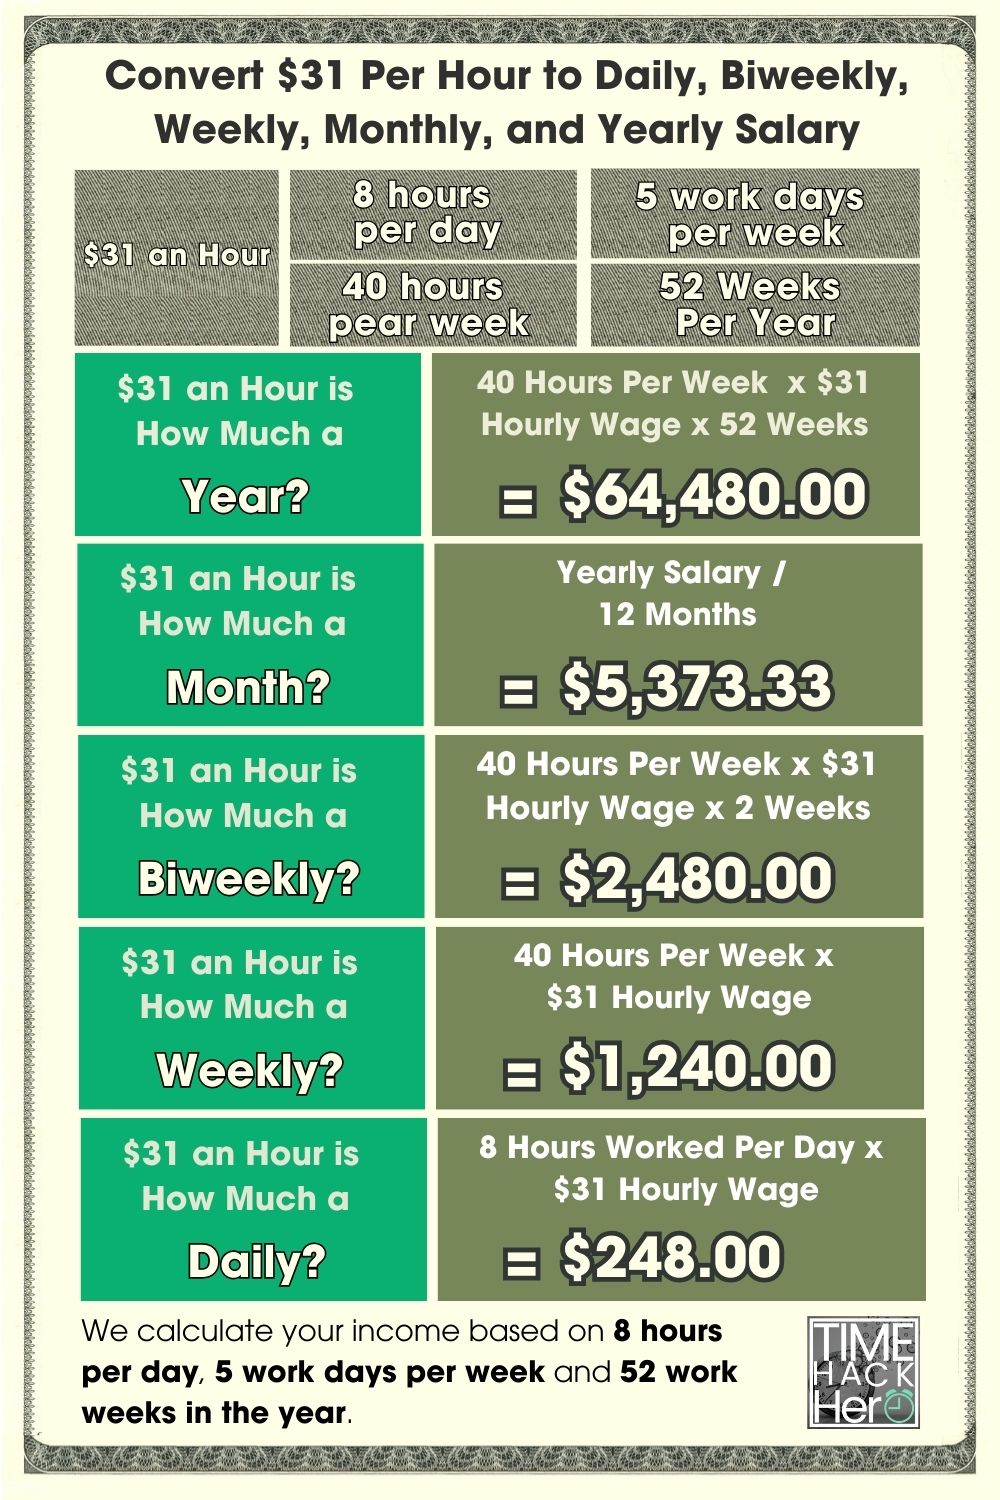 Convert $31 Per Hour to Daily, Biweekly, Weekly, Monthly, and Yearly Salary